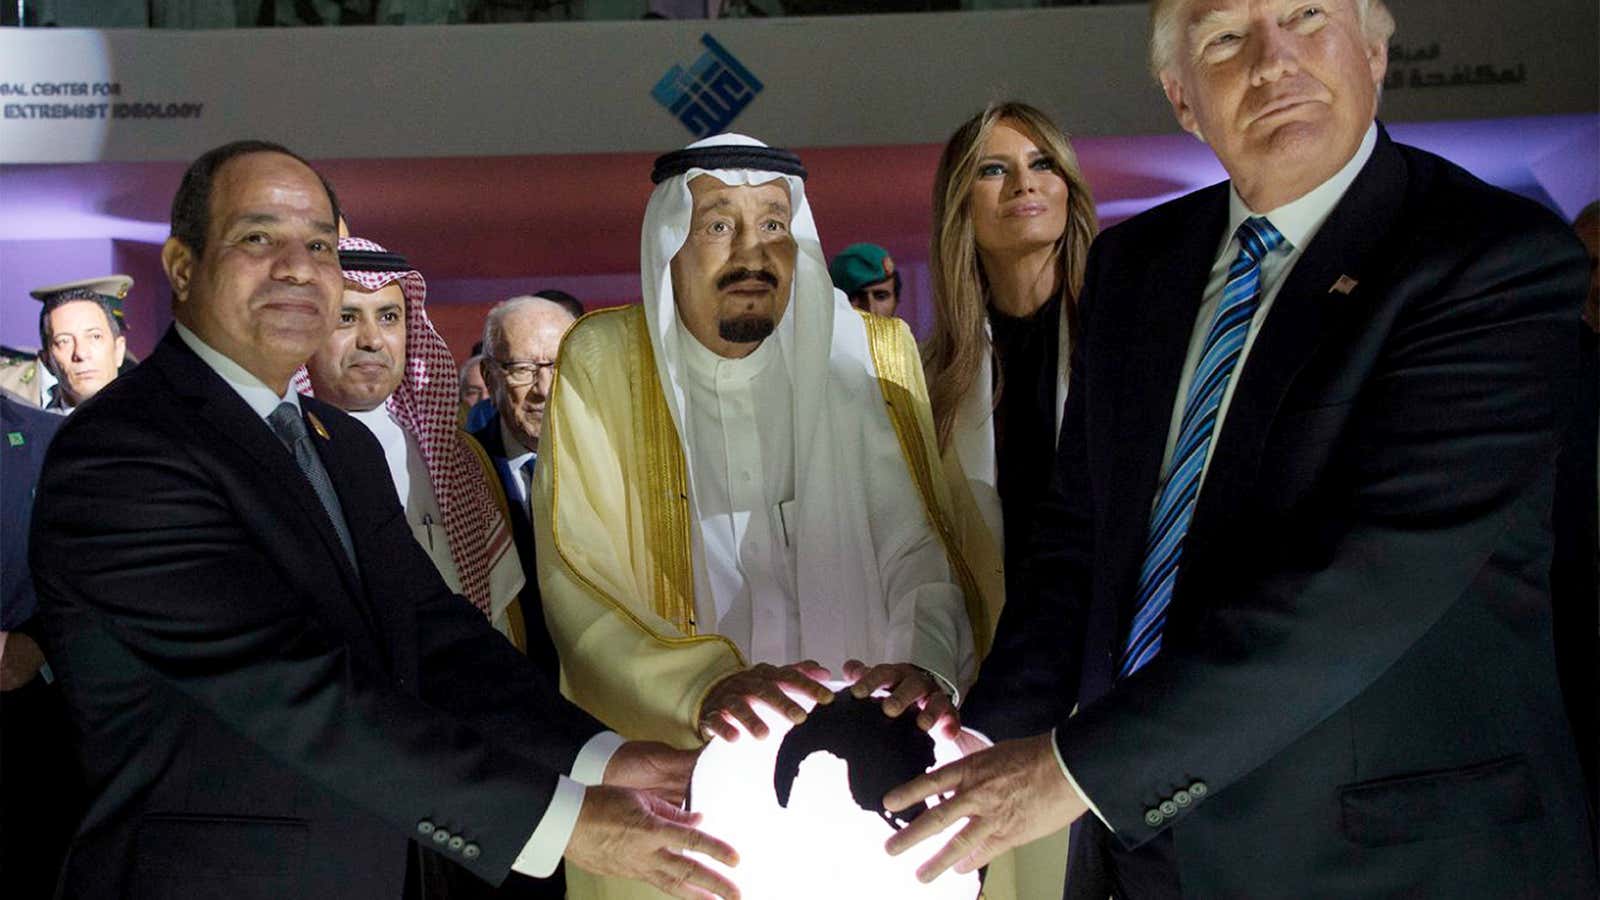 The all seeing Orb.